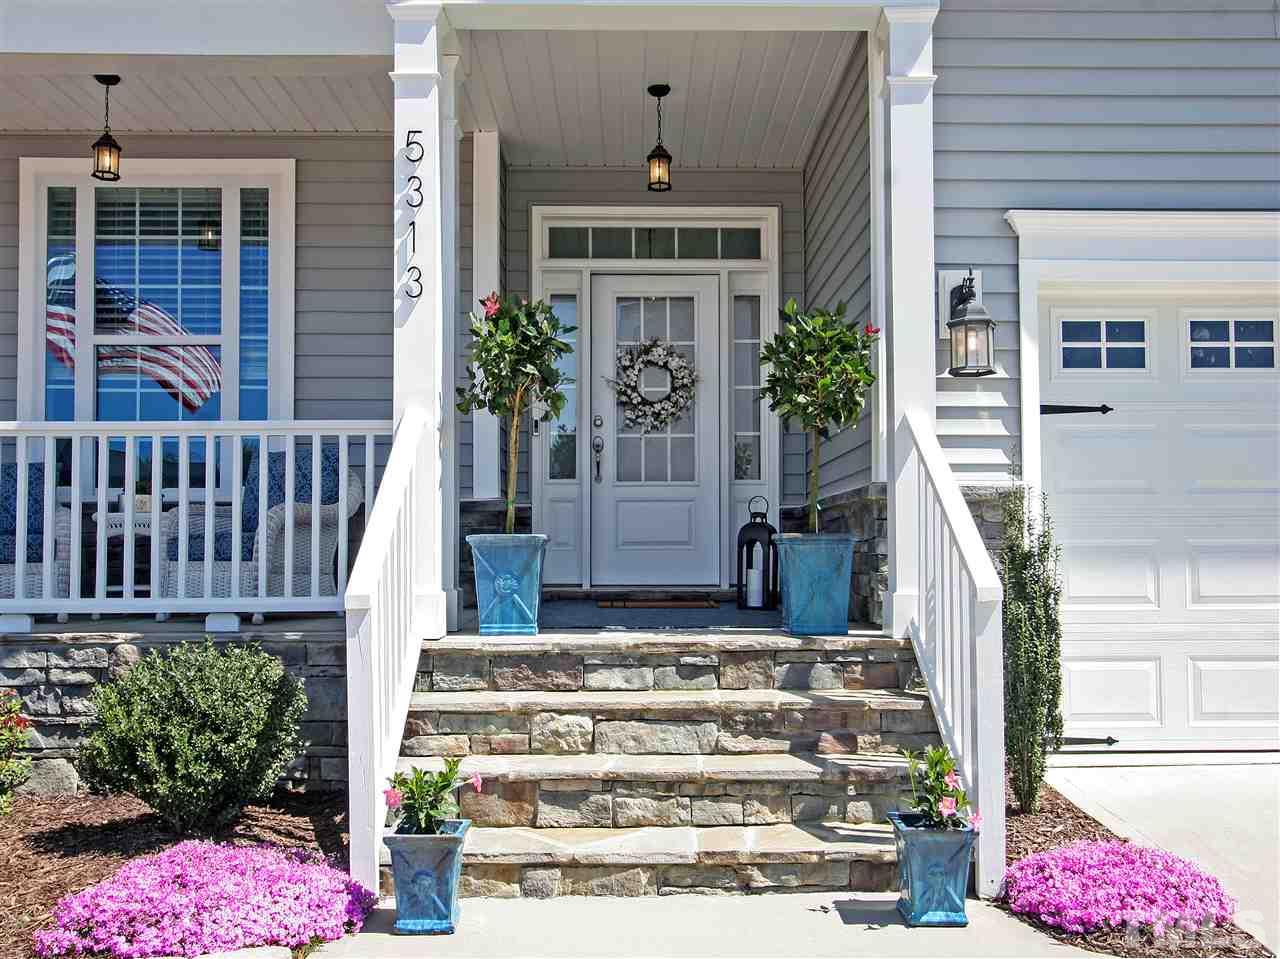 Beautiful front porch greets you and your guests. Stone accents and easy-care vinyl siding. Two-car garage and plenty of driveway parking.